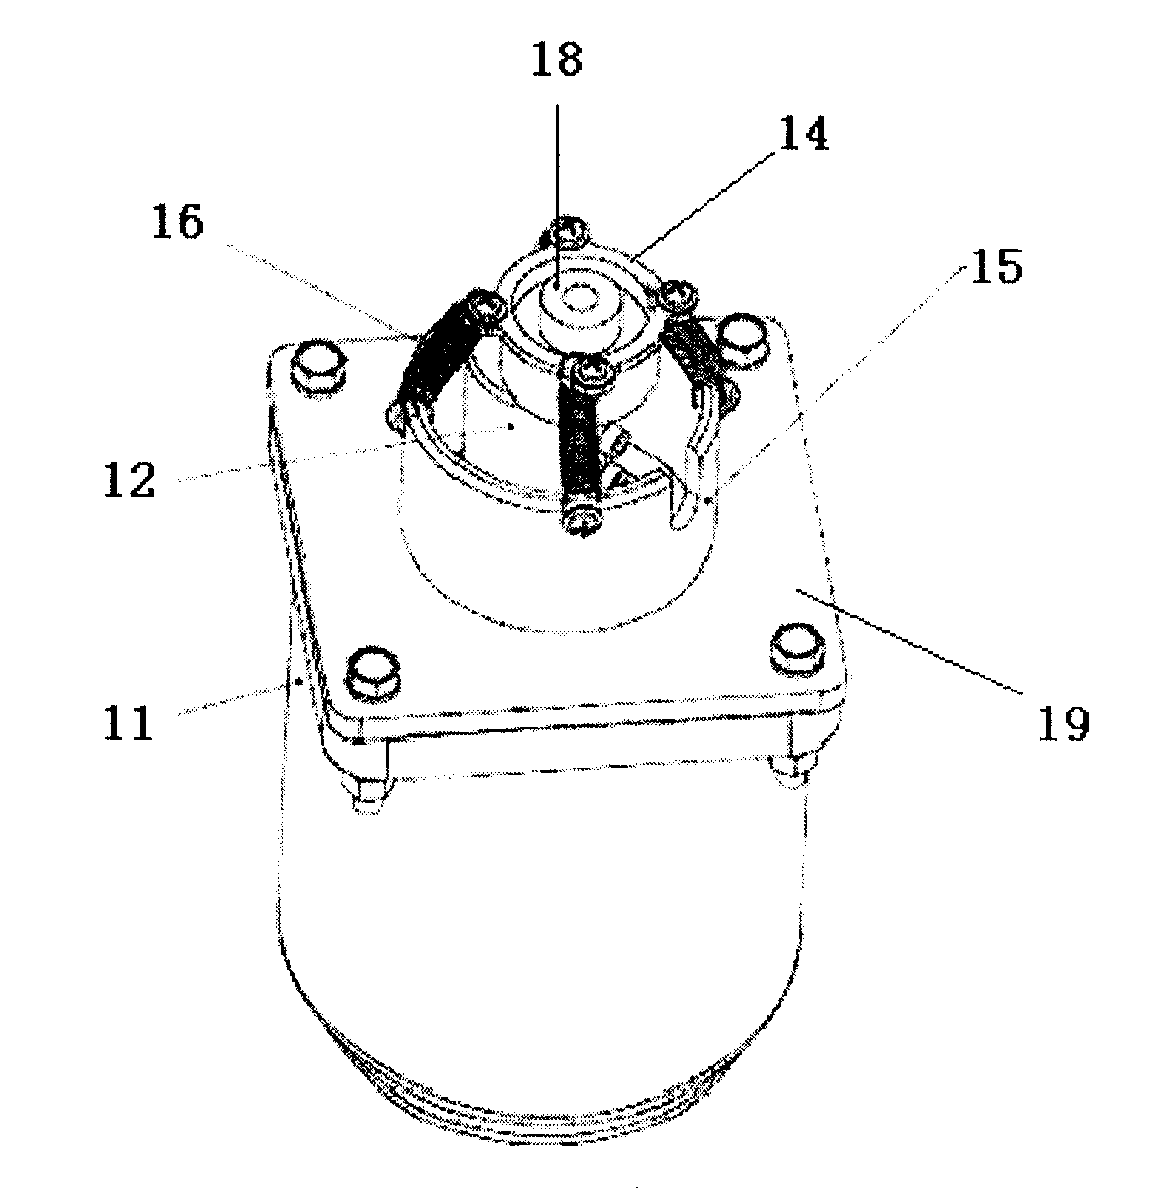 Nucleic acid extraction device